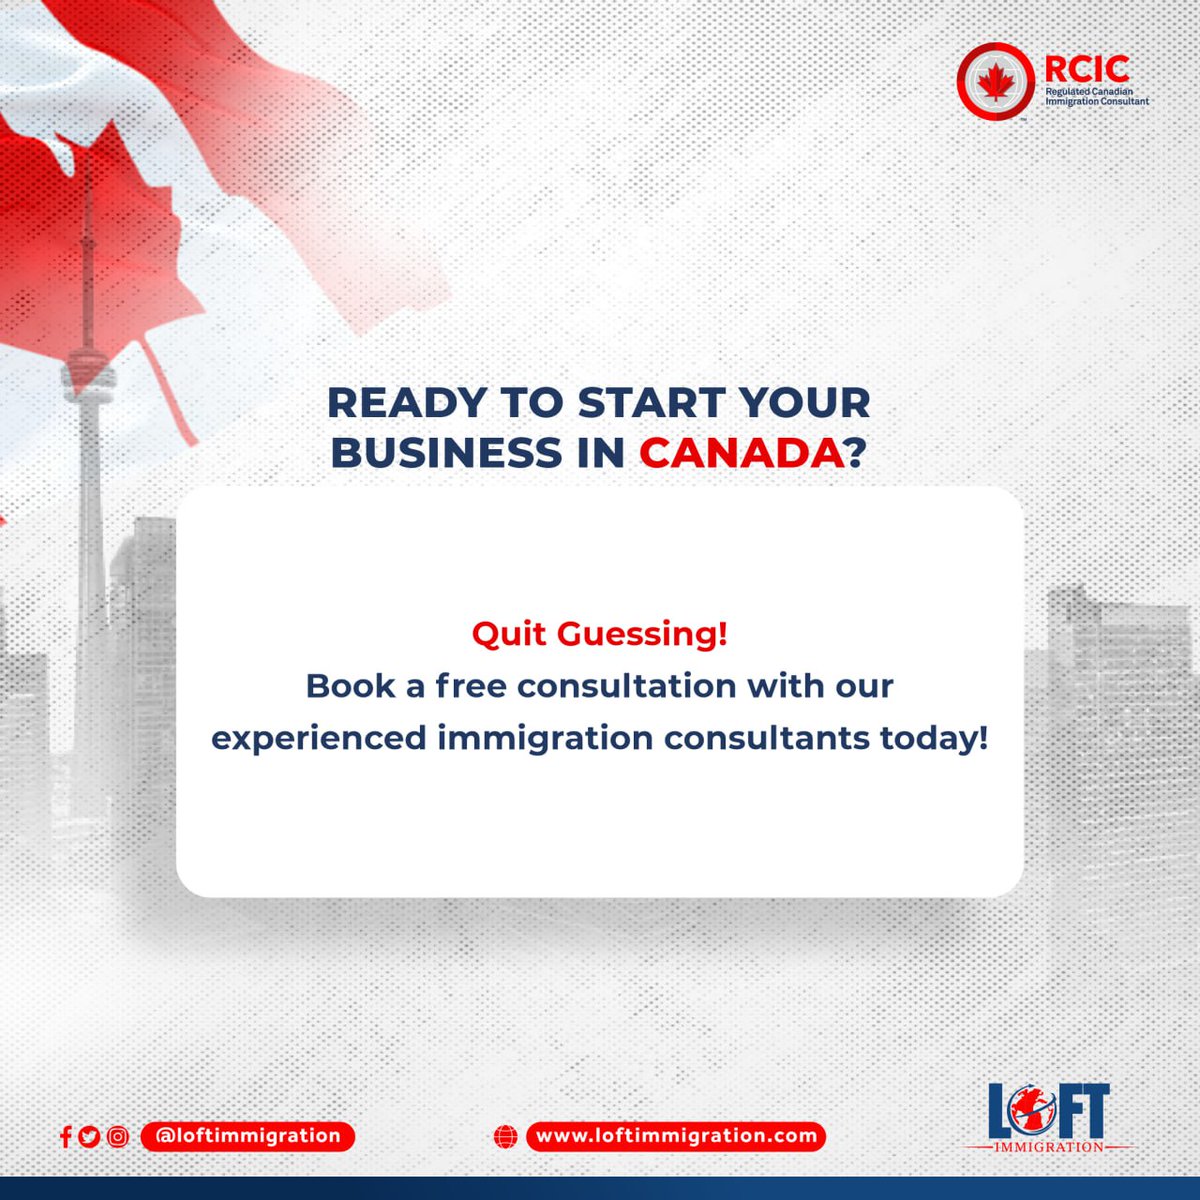 🤔Considering buying a business in Canada? Here are 5 essential factors to consider! Ready to take the next step? Book a free consultation with our experienced immigration consultants today!
#loftimmigration #canadabusinessimmigration